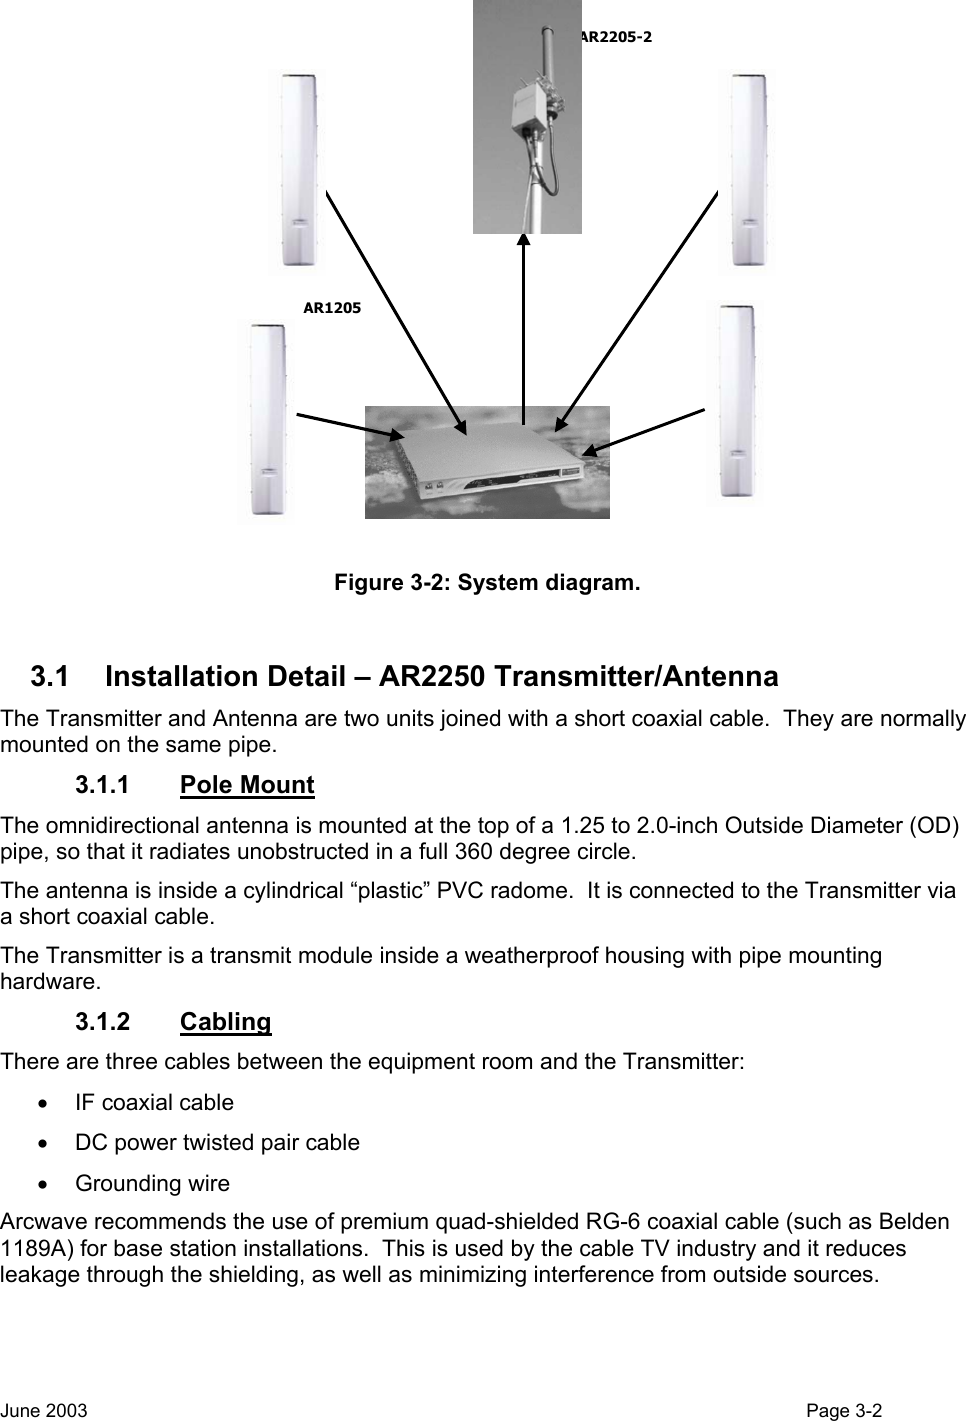  AR1205AR2205-2 Figure 3-2: System diagram.  3.1  Installation Detail – AR2250 Transmitter/Antenna The Transmitter and Antenna are two units joined with a short coaxial cable.  They are normally mounted on the same pipe. 3.1.1 Pole Mount The omnidirectional antenna is mounted at the top of a 1.25 to 2.0-inch Outside Diameter (OD) pipe, so that it radiates unobstructed in a full 360 degree circle. The antenna is inside a cylindrical “plastic” PVC radome.  It is connected to the Transmitter via a short coaxial cable. The Transmitter is a transmit module inside a weatherproof housing with pipe mounting hardware. 3.1.2 Cabling There are three cables between the equipment room and the Transmitter: •  IF coaxial cable •  DC power twisted pair cable • Grounding wire Arcwave recommends the use of premium quad-shielded RG-6 coaxial cable (such as Belden 1189A) for base station installations.  This is used by the cable TV industry and it reduces leakage through the shielding, as well as minimizing interference from outside sources.   June 2003                                                                                                                                          Page 3-2  